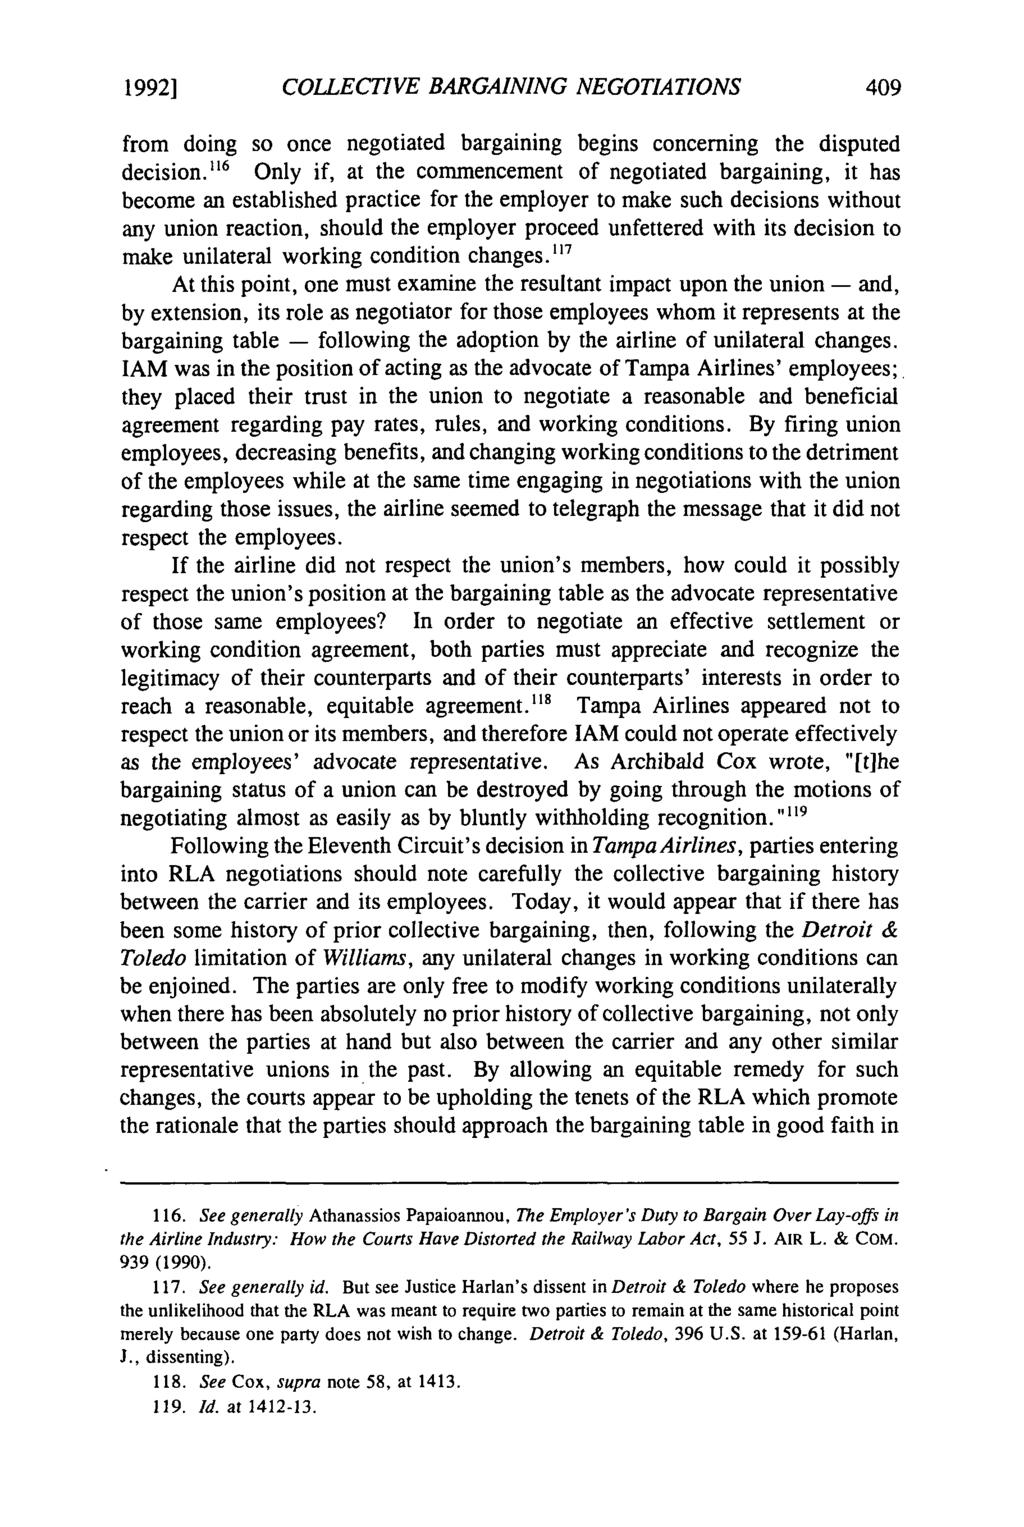 19921 Dade: Dade: Negotiating in Good Faith: COLLECTIVE BARGAINING NEGOTIATIONS from doing so once negotiated bargaining begins concerning the disputed decision.